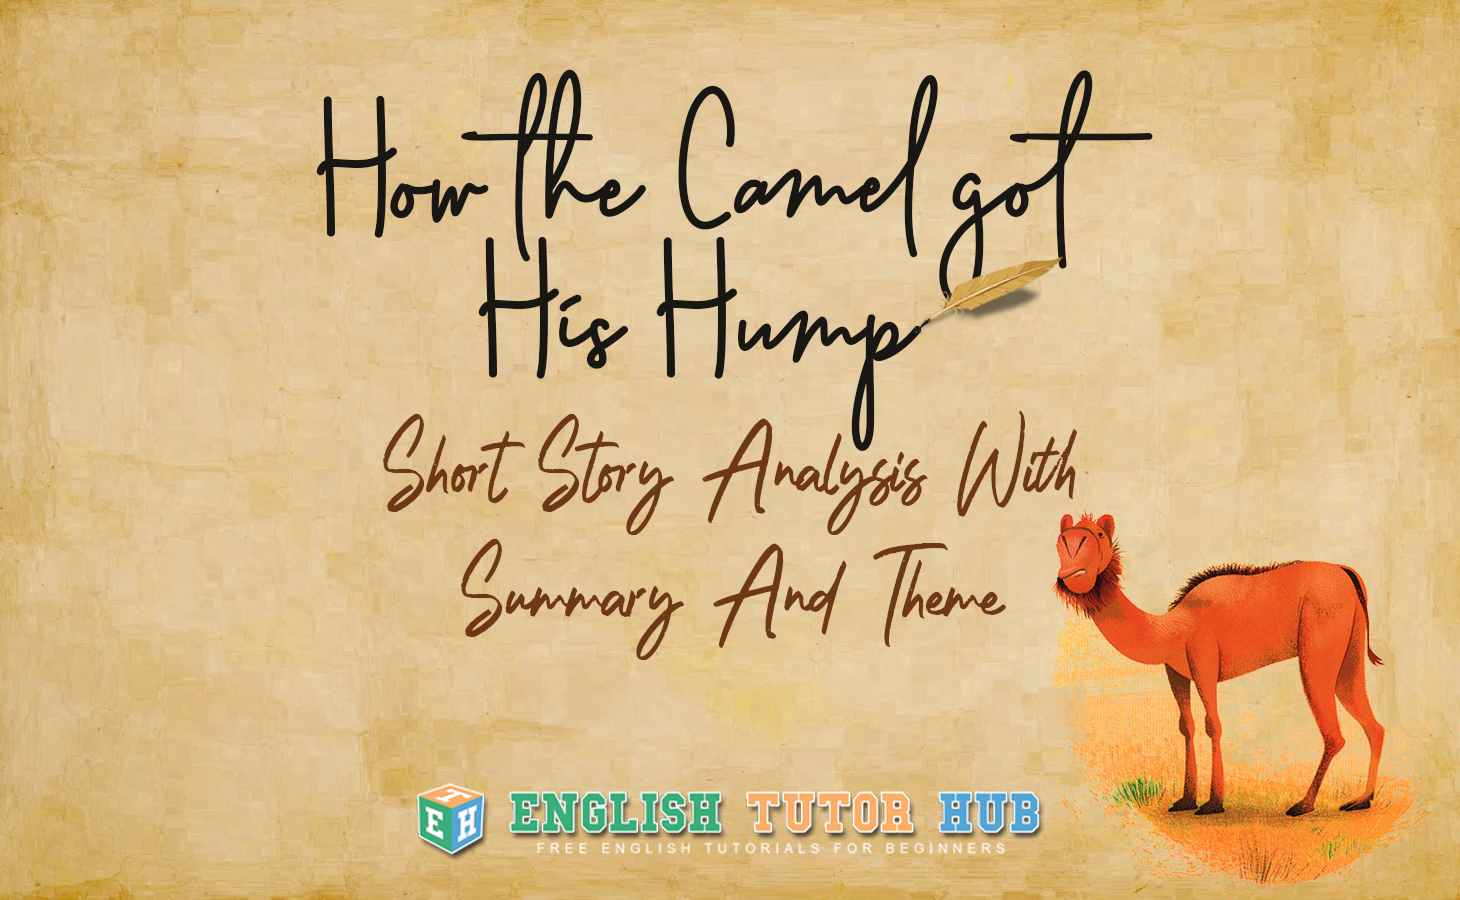 How The Camel Got His Hump Short Story Analysis With Summary And Theme